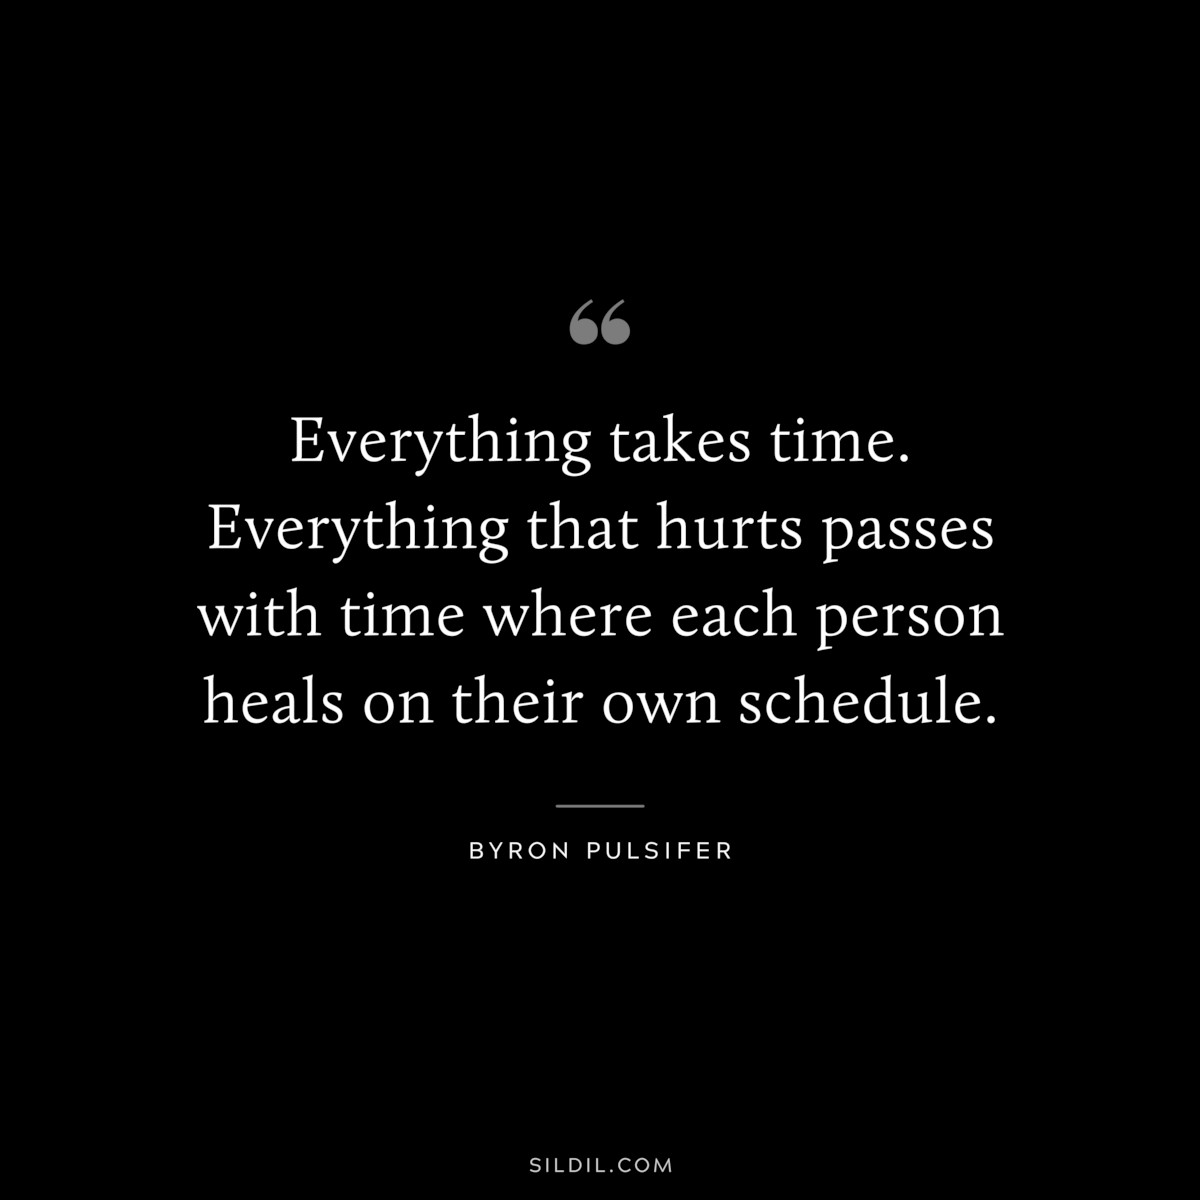 Everything takes time. Everything that hurts passes with time where each person heals on their own schedule. ― Byron Pulsifer